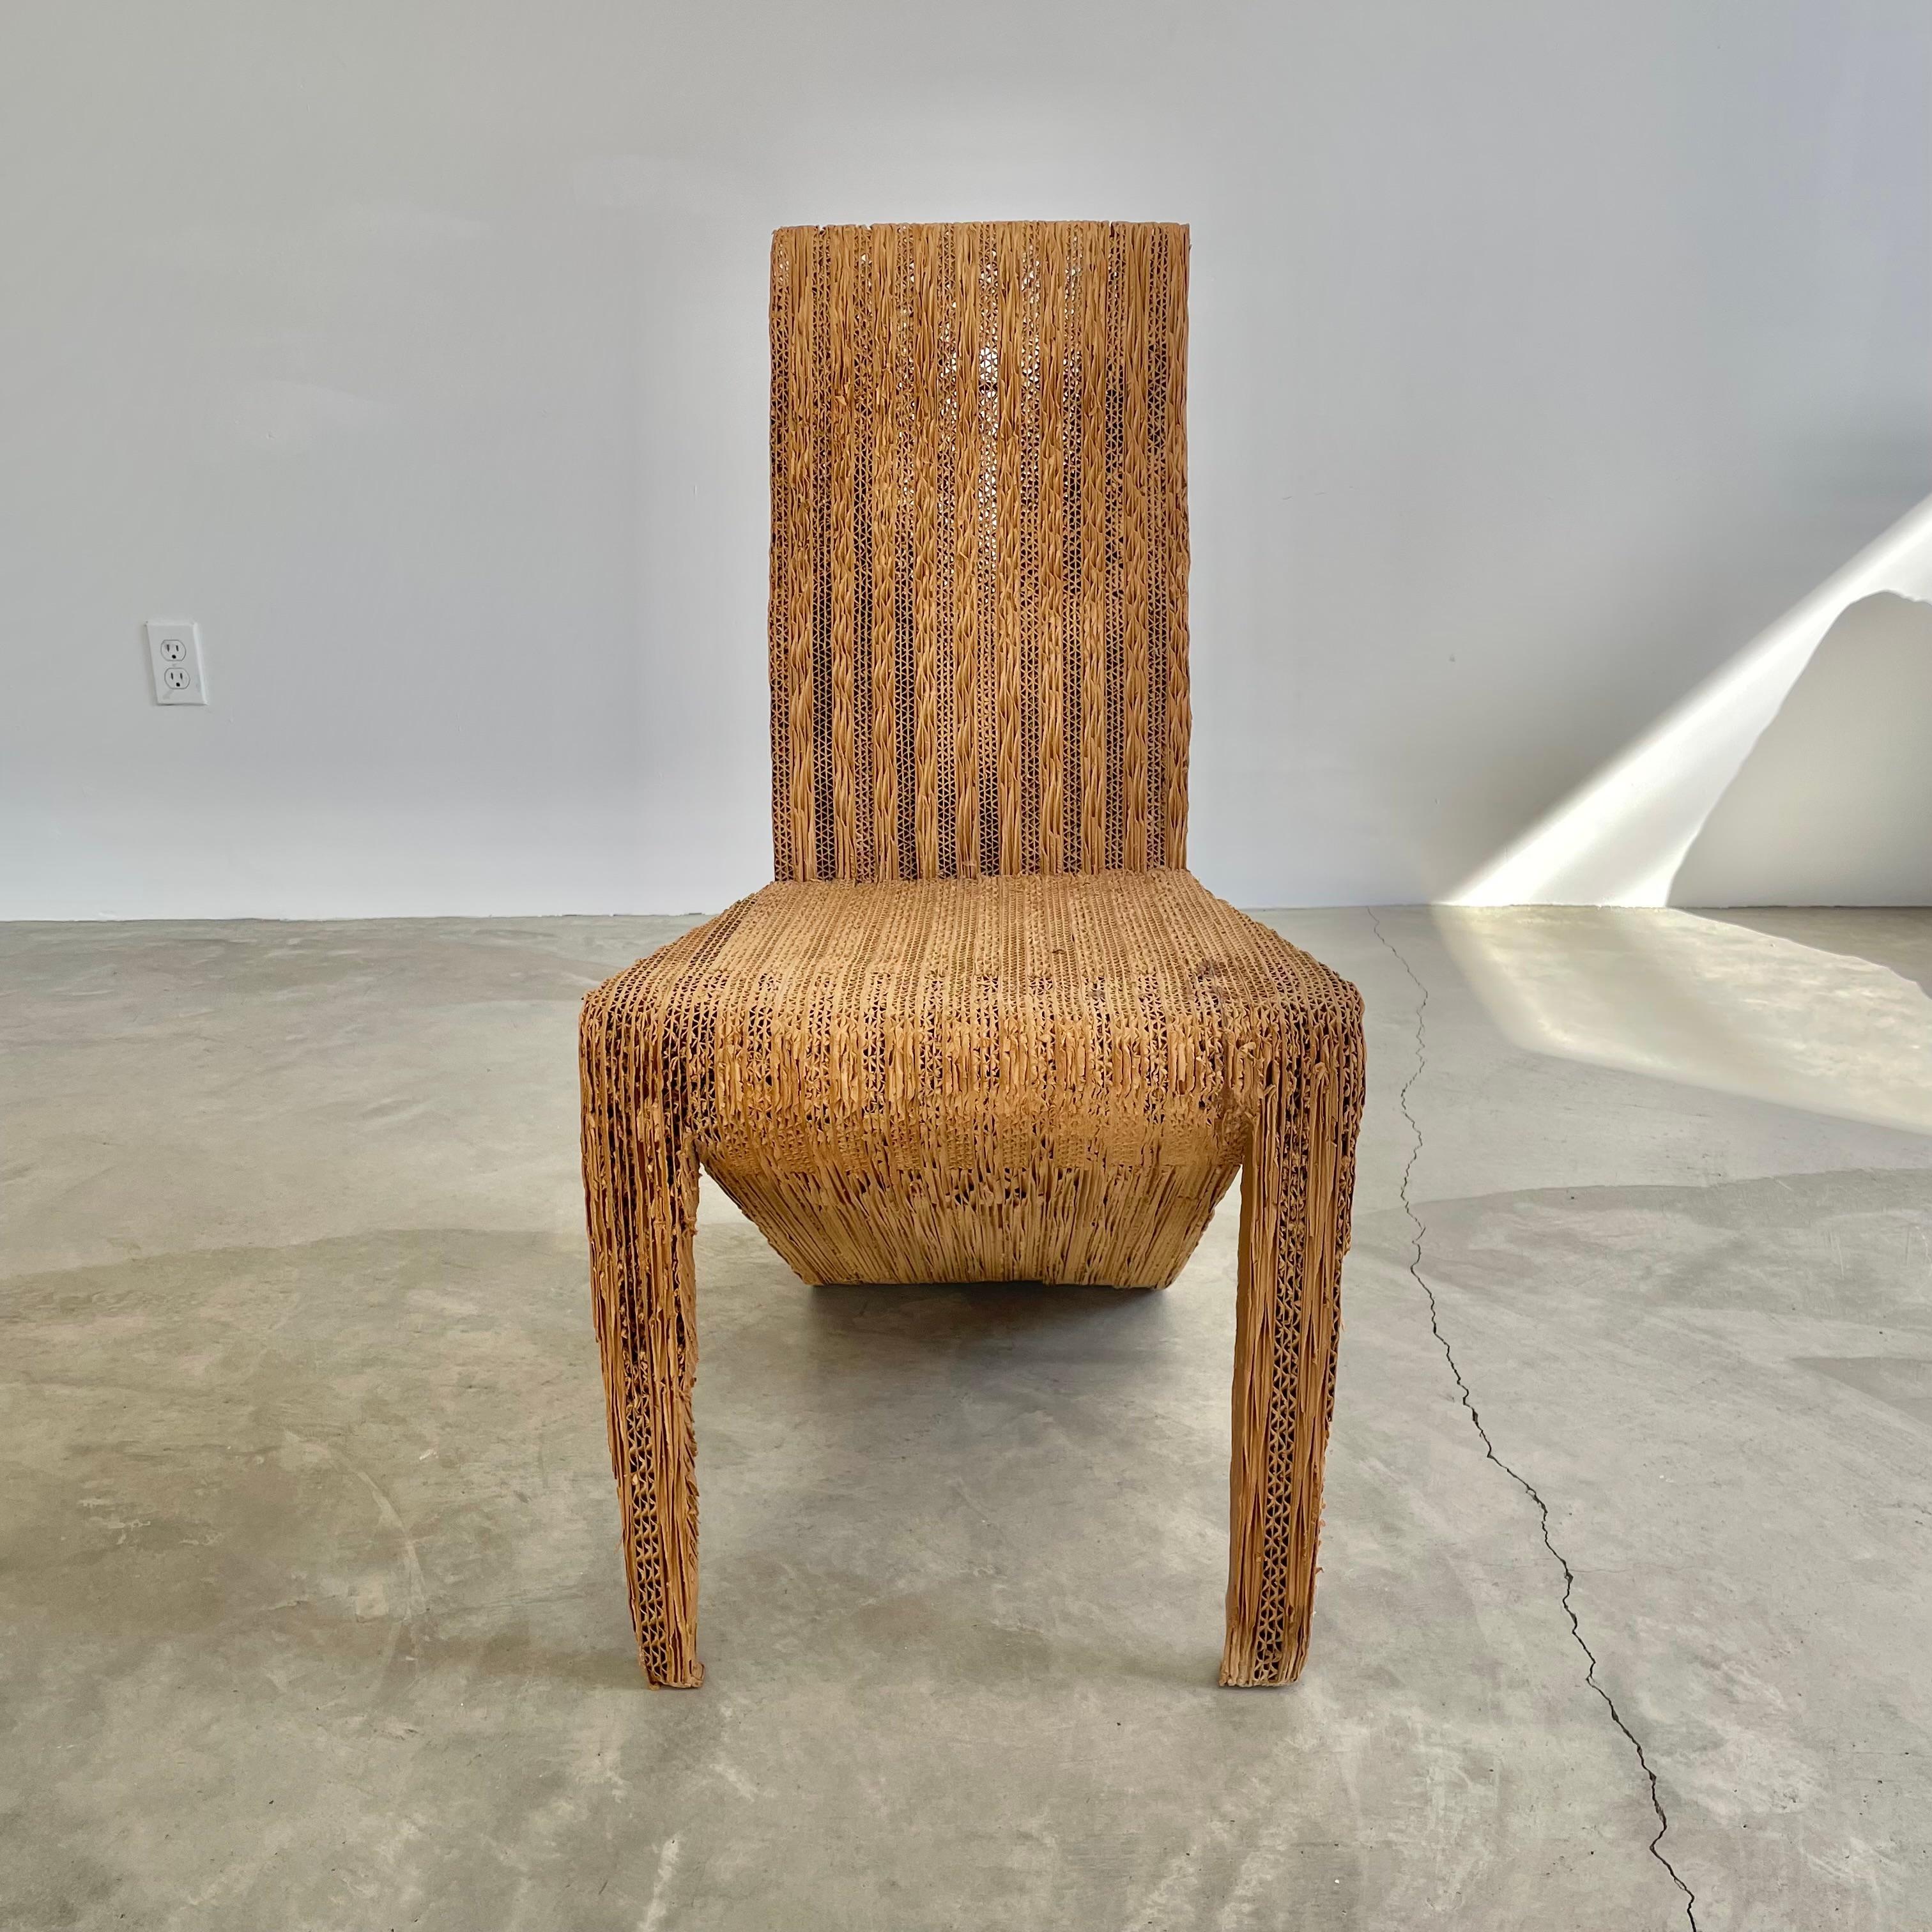 Masonite Frank Gehry Prototype Accent Chair, 1970s Los Angeles For Sale